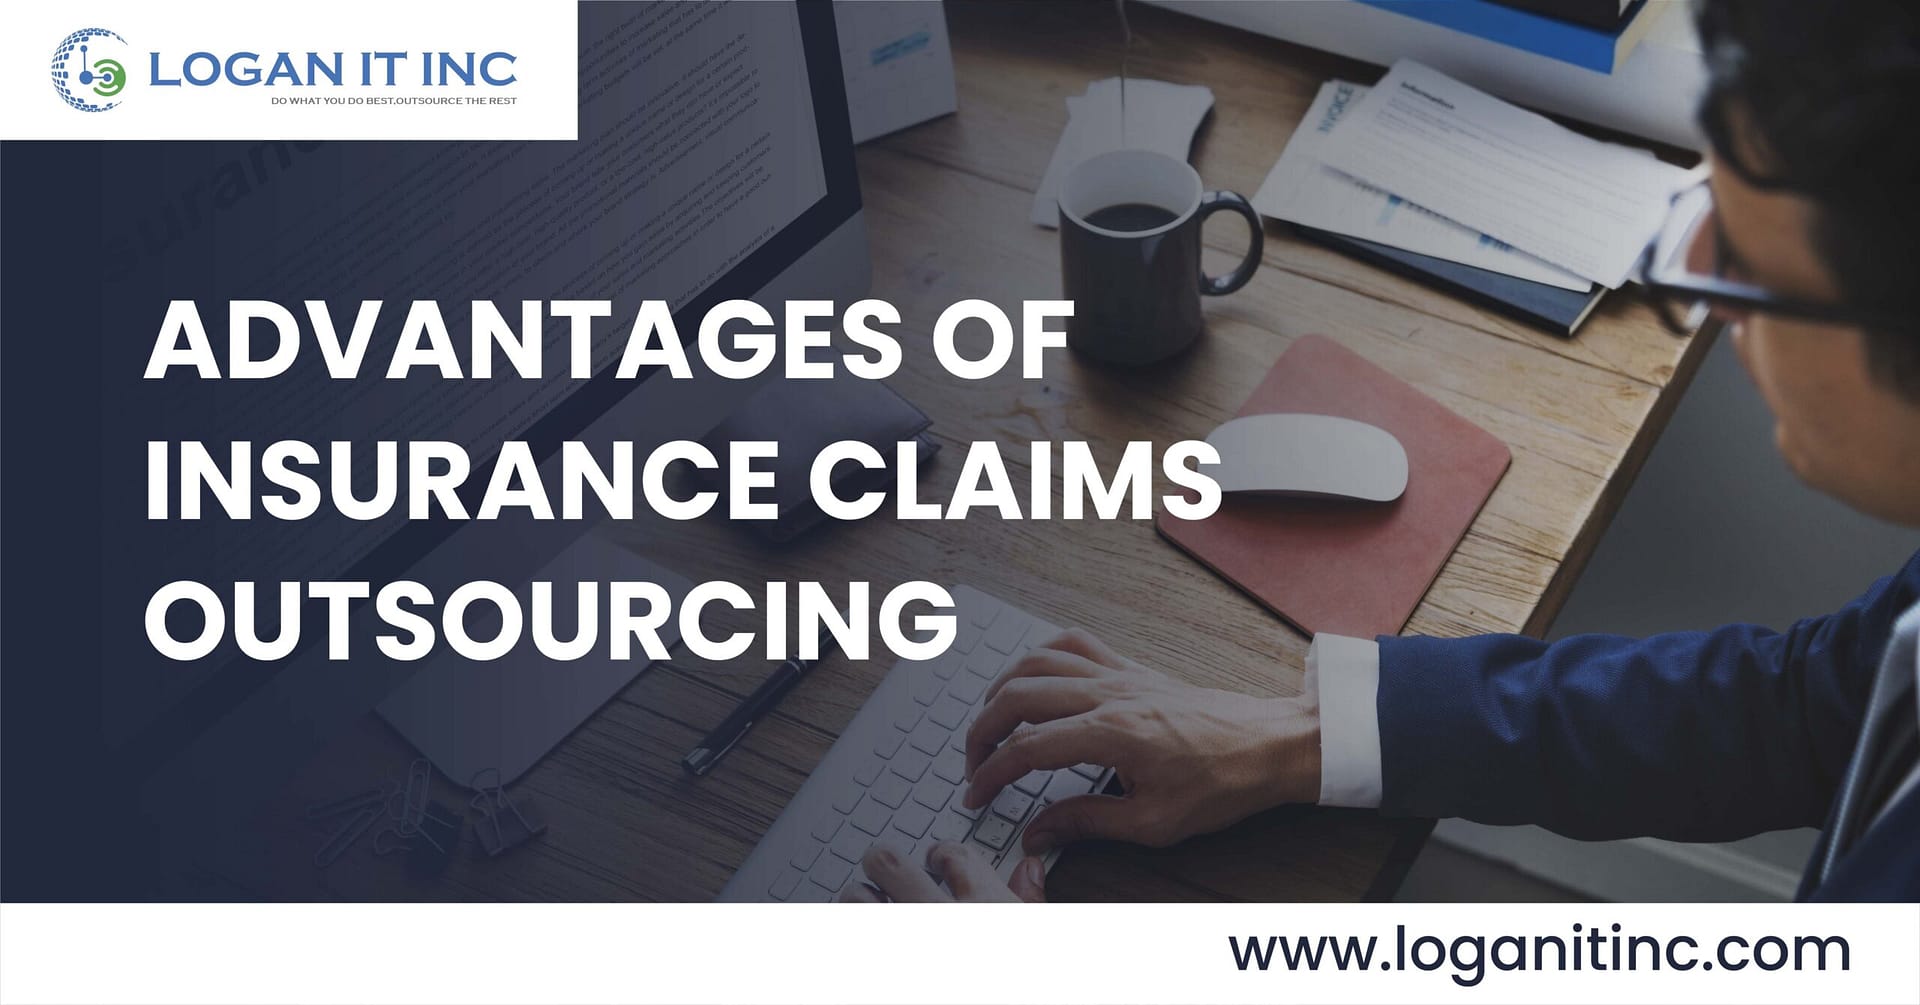 Outsource Insurance claims | Insurance claims outsourcing | Claims management outsourcing | Logan IT Inc